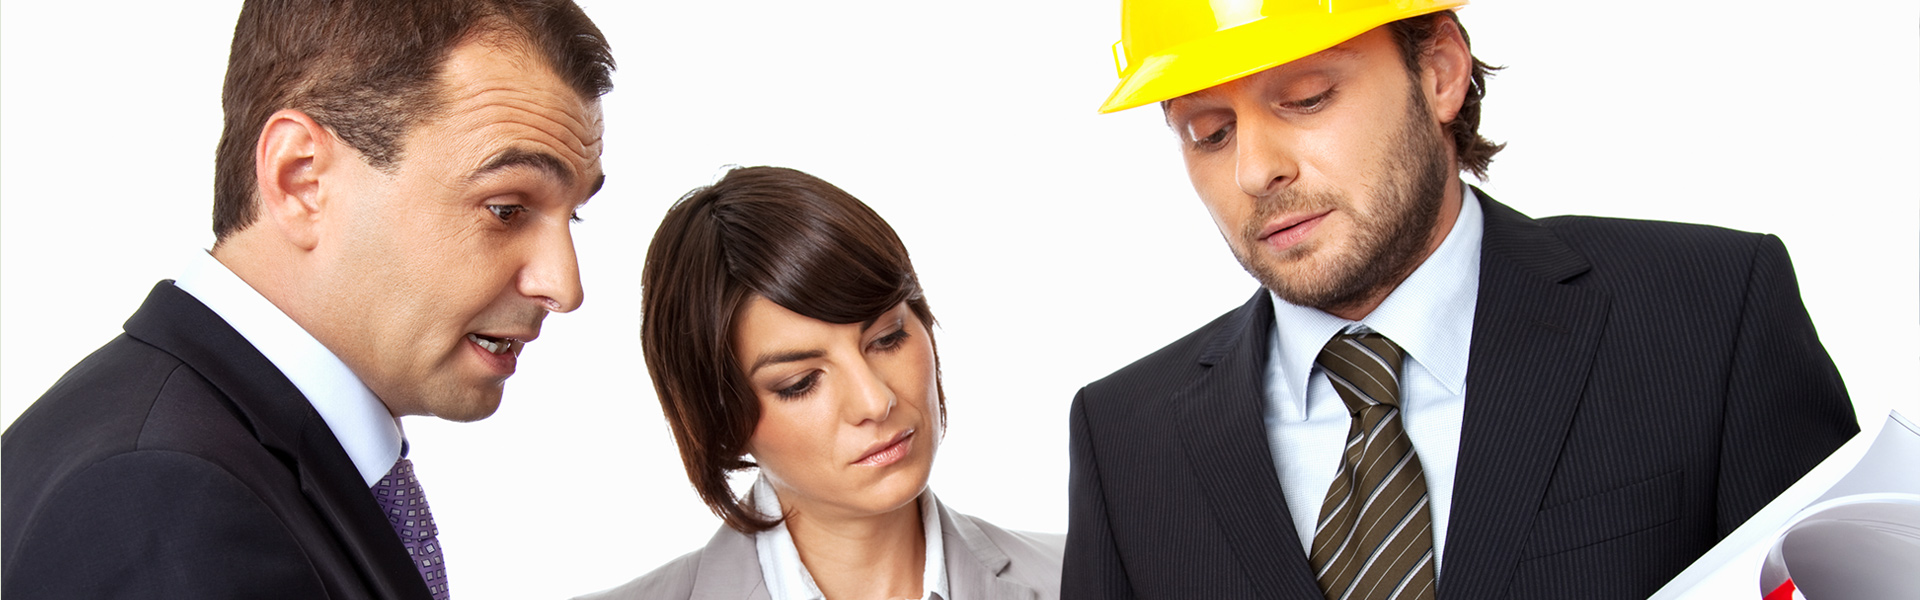 Construction Law Firms